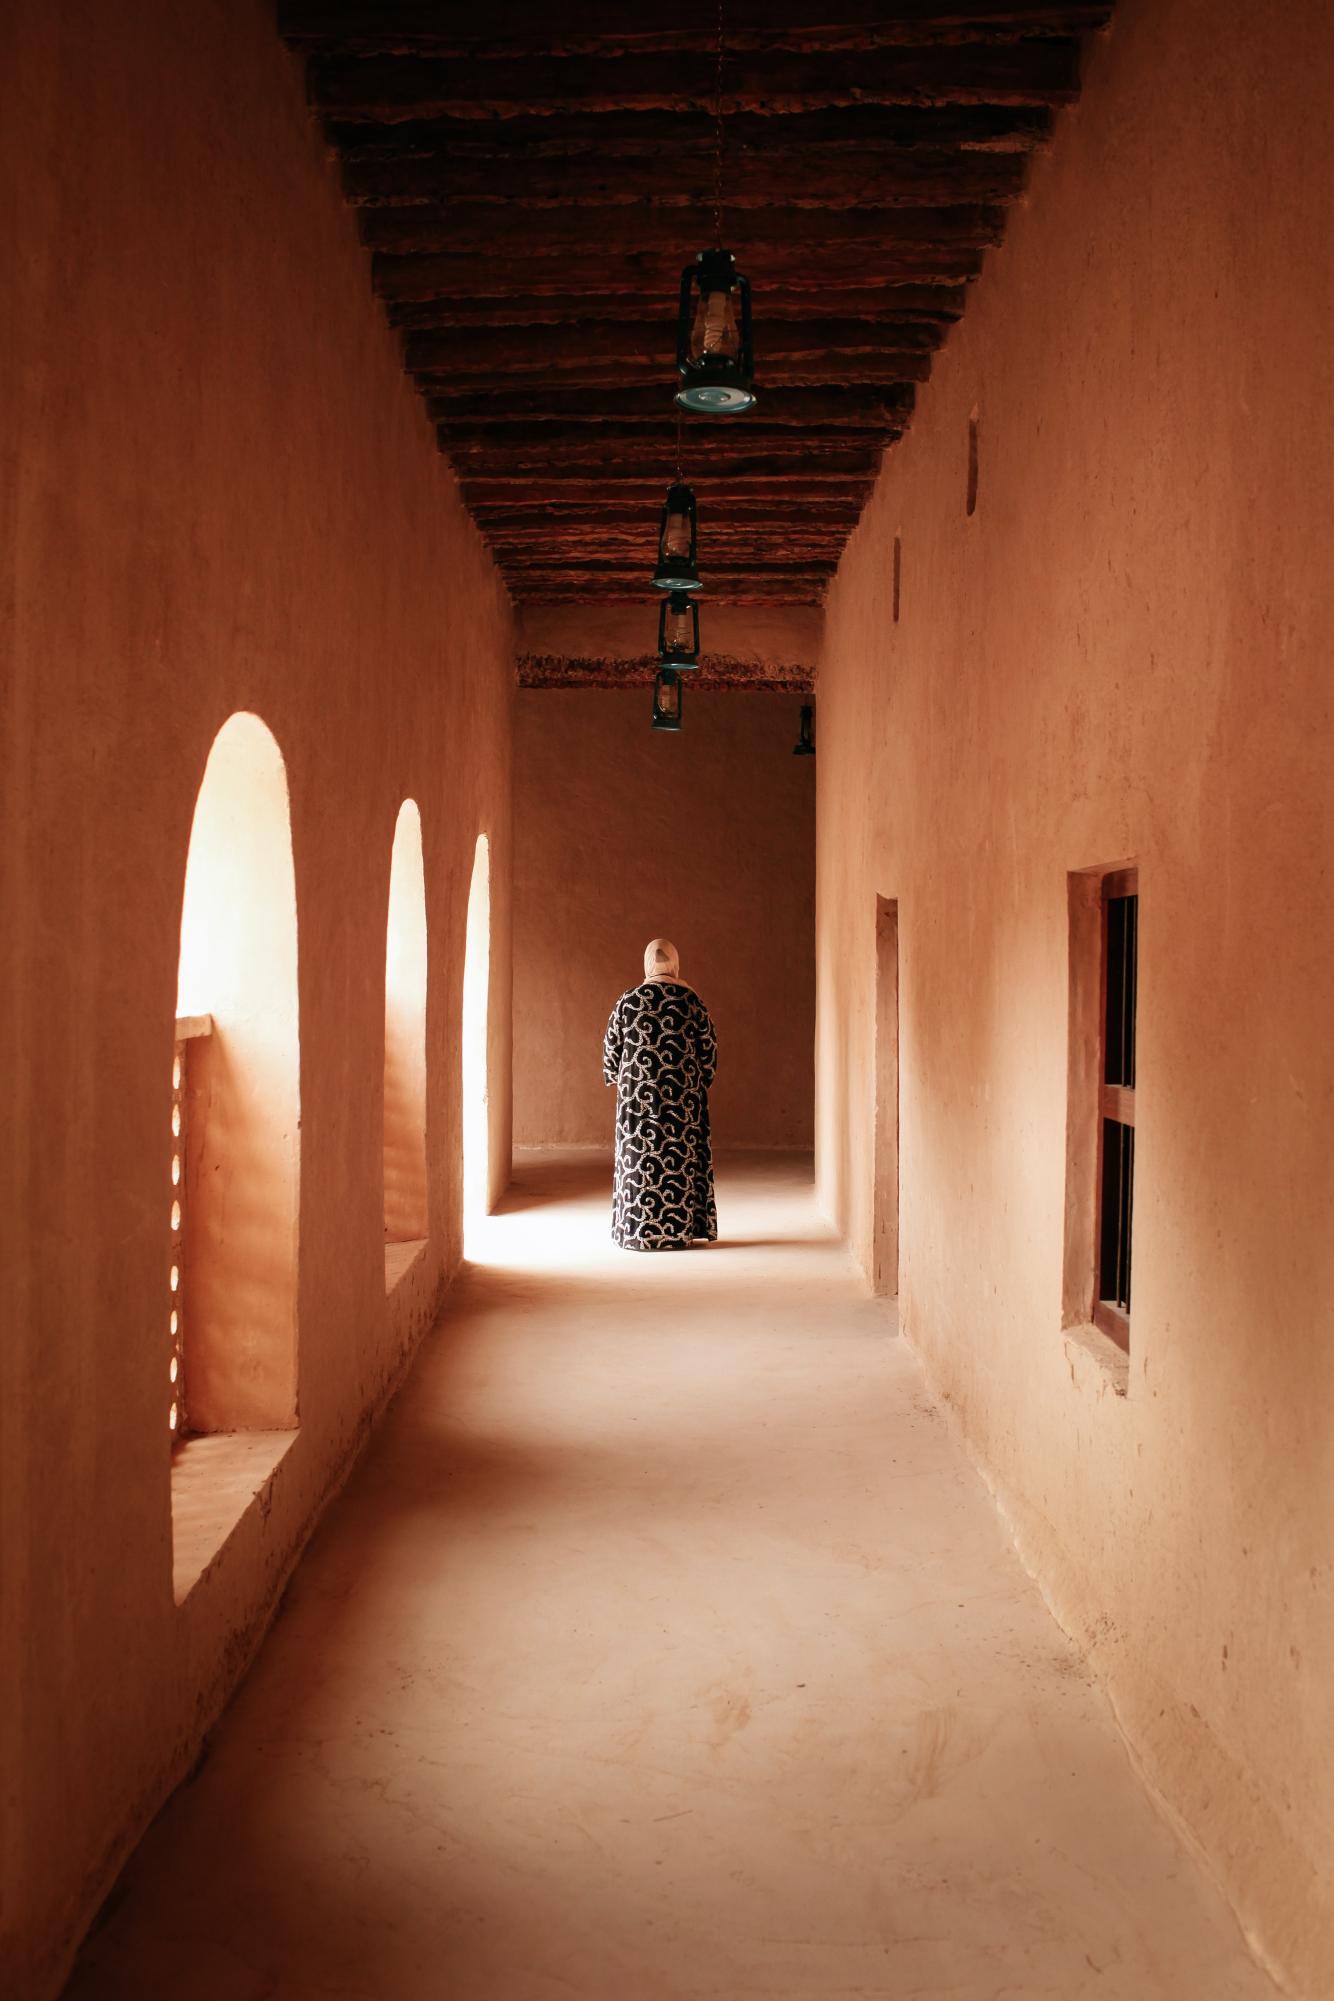 The origins of the abaya are quite vague, dating back to the ancient civilizations of Mesopotamia. (Photo Credit: Ryan Miglinczy / Unsplash) 